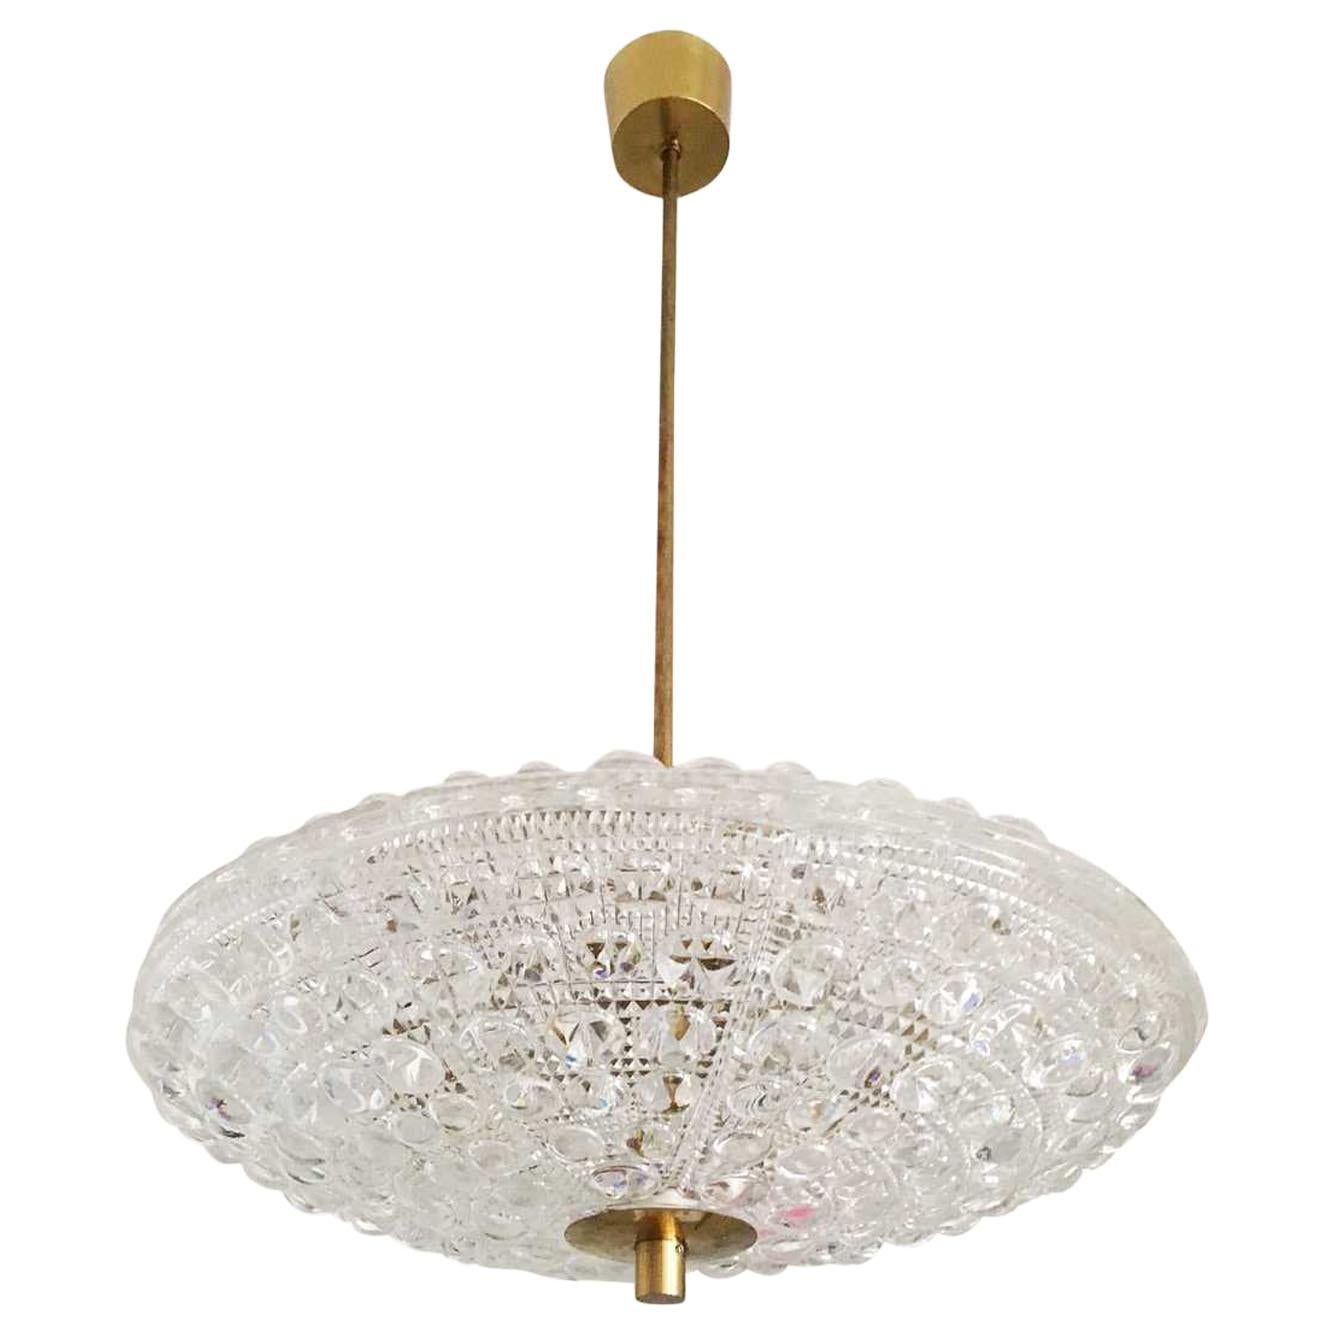 Pair of Orrefors Flying Saucer Shaped Chandelier